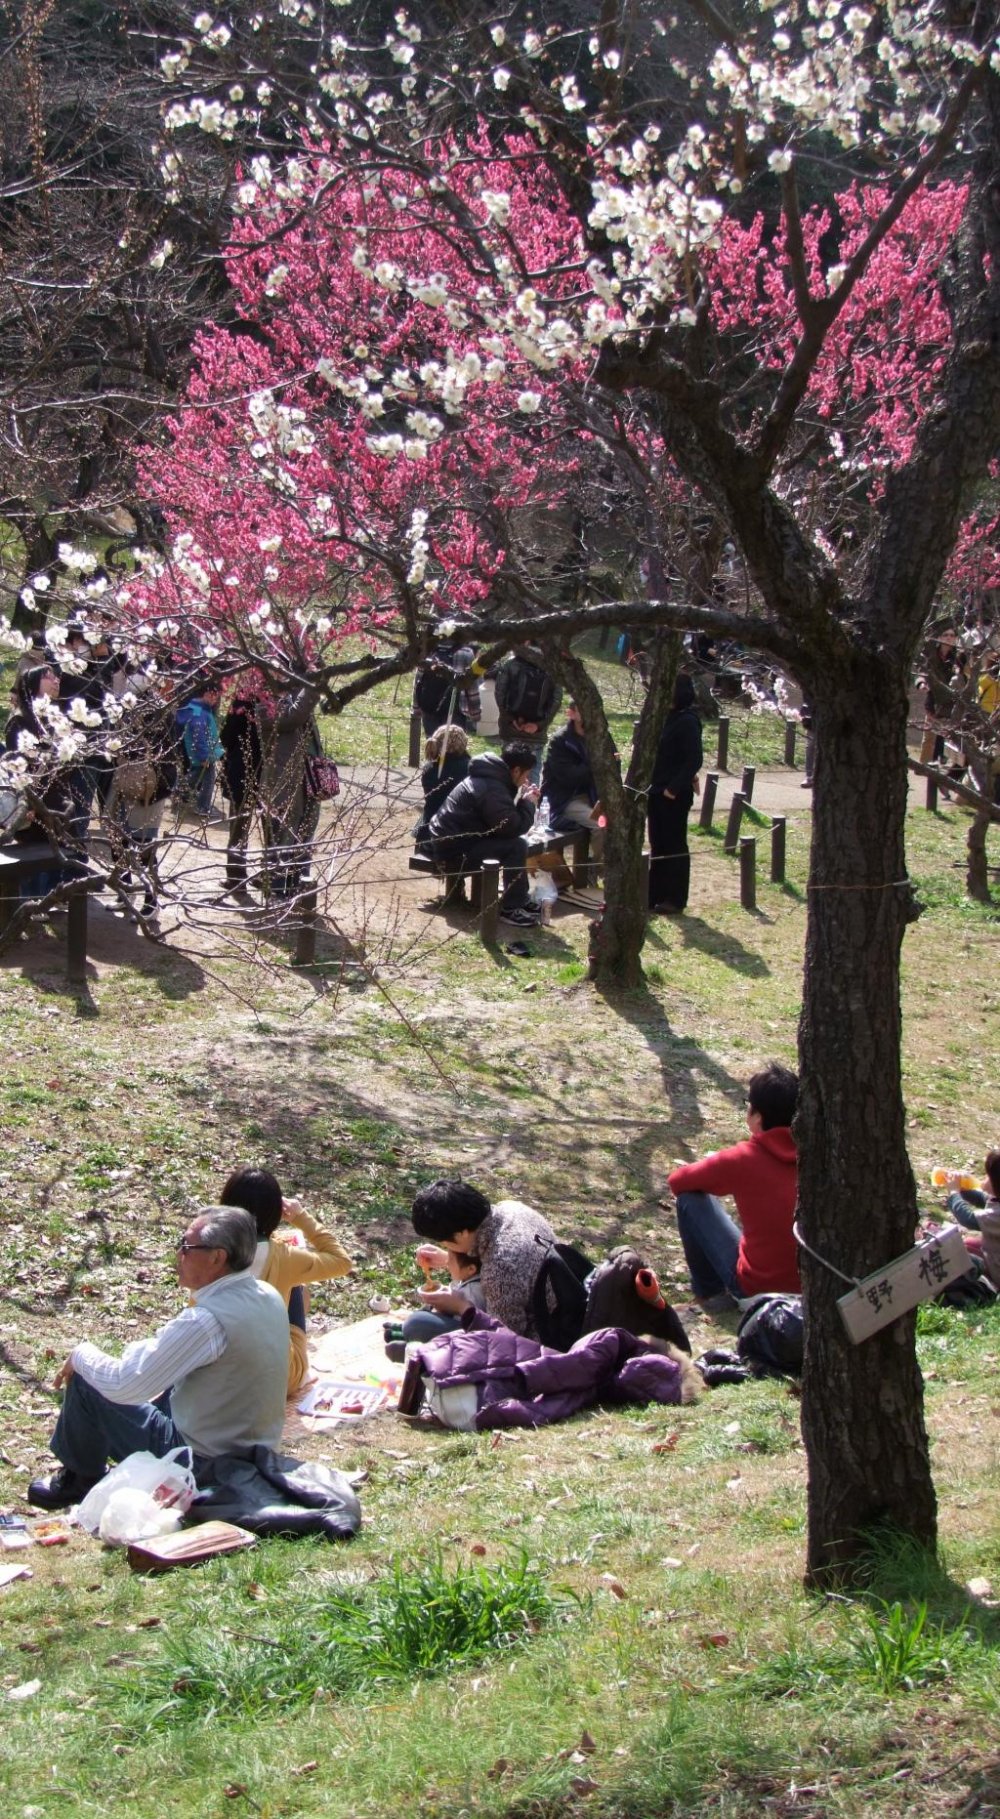 Sit, relax, and enjoy the winter plum blossoms